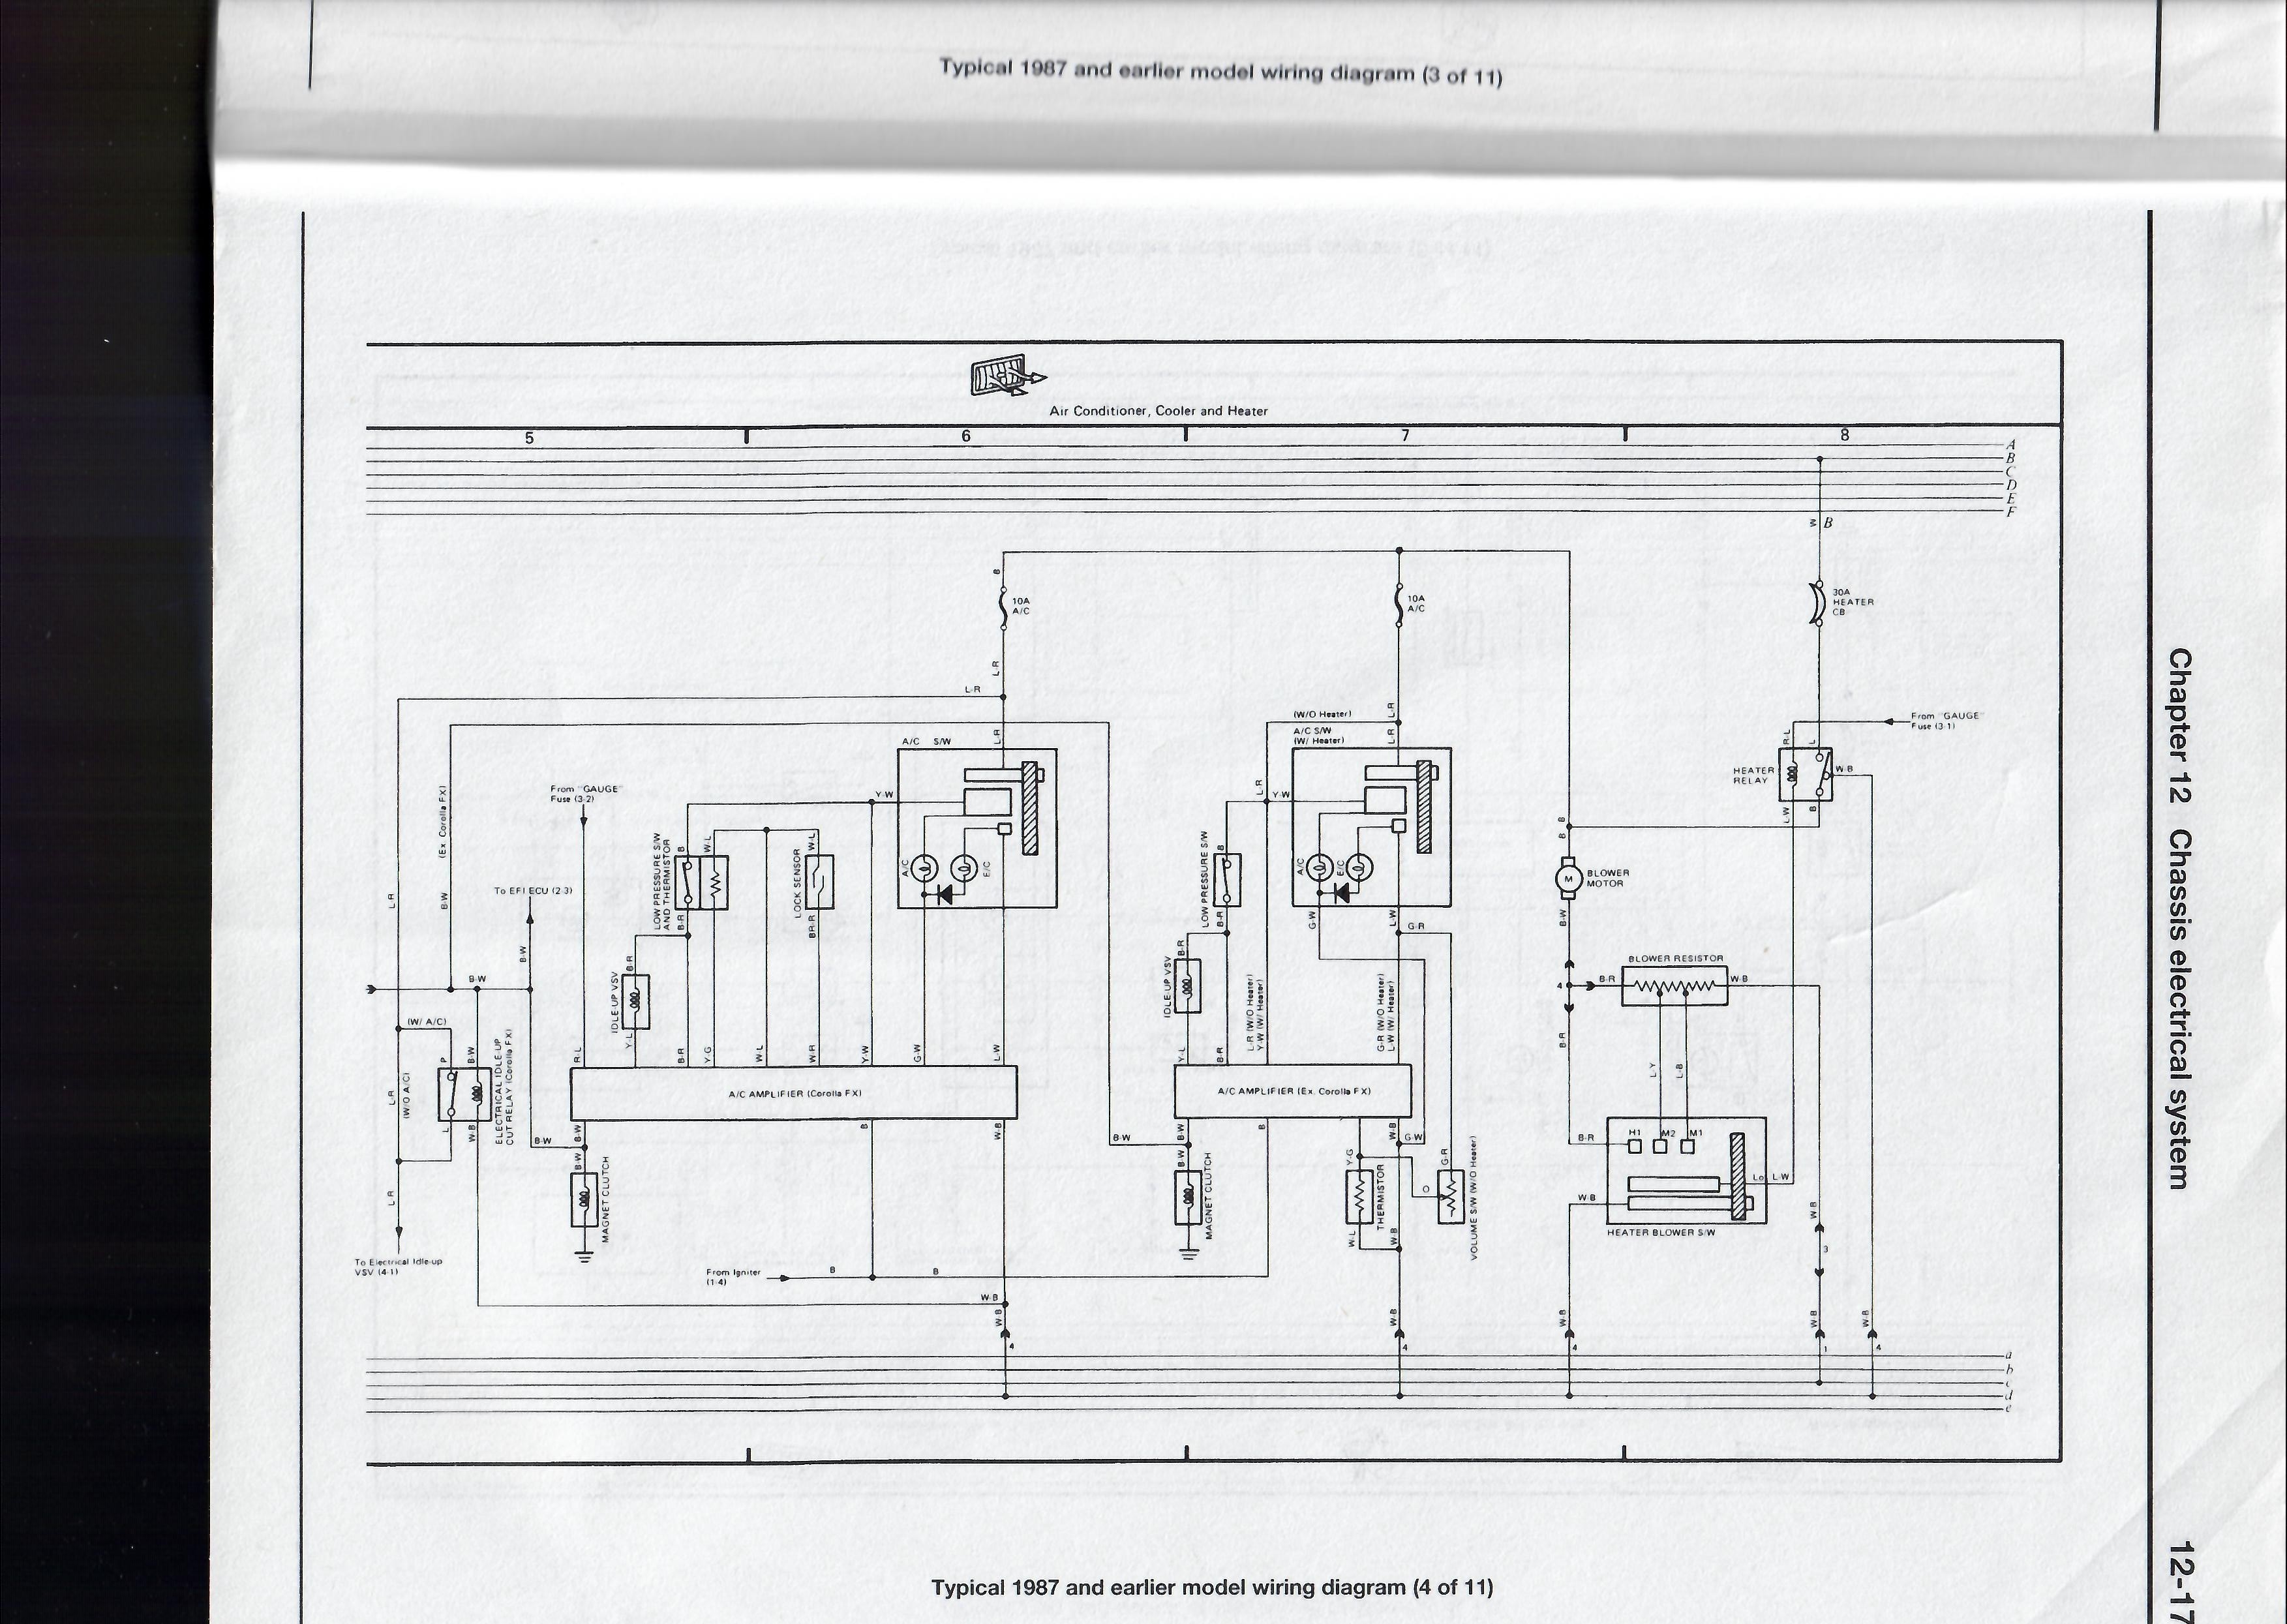 I Need Electrical Wiring Diagram And Service Manual Of E80